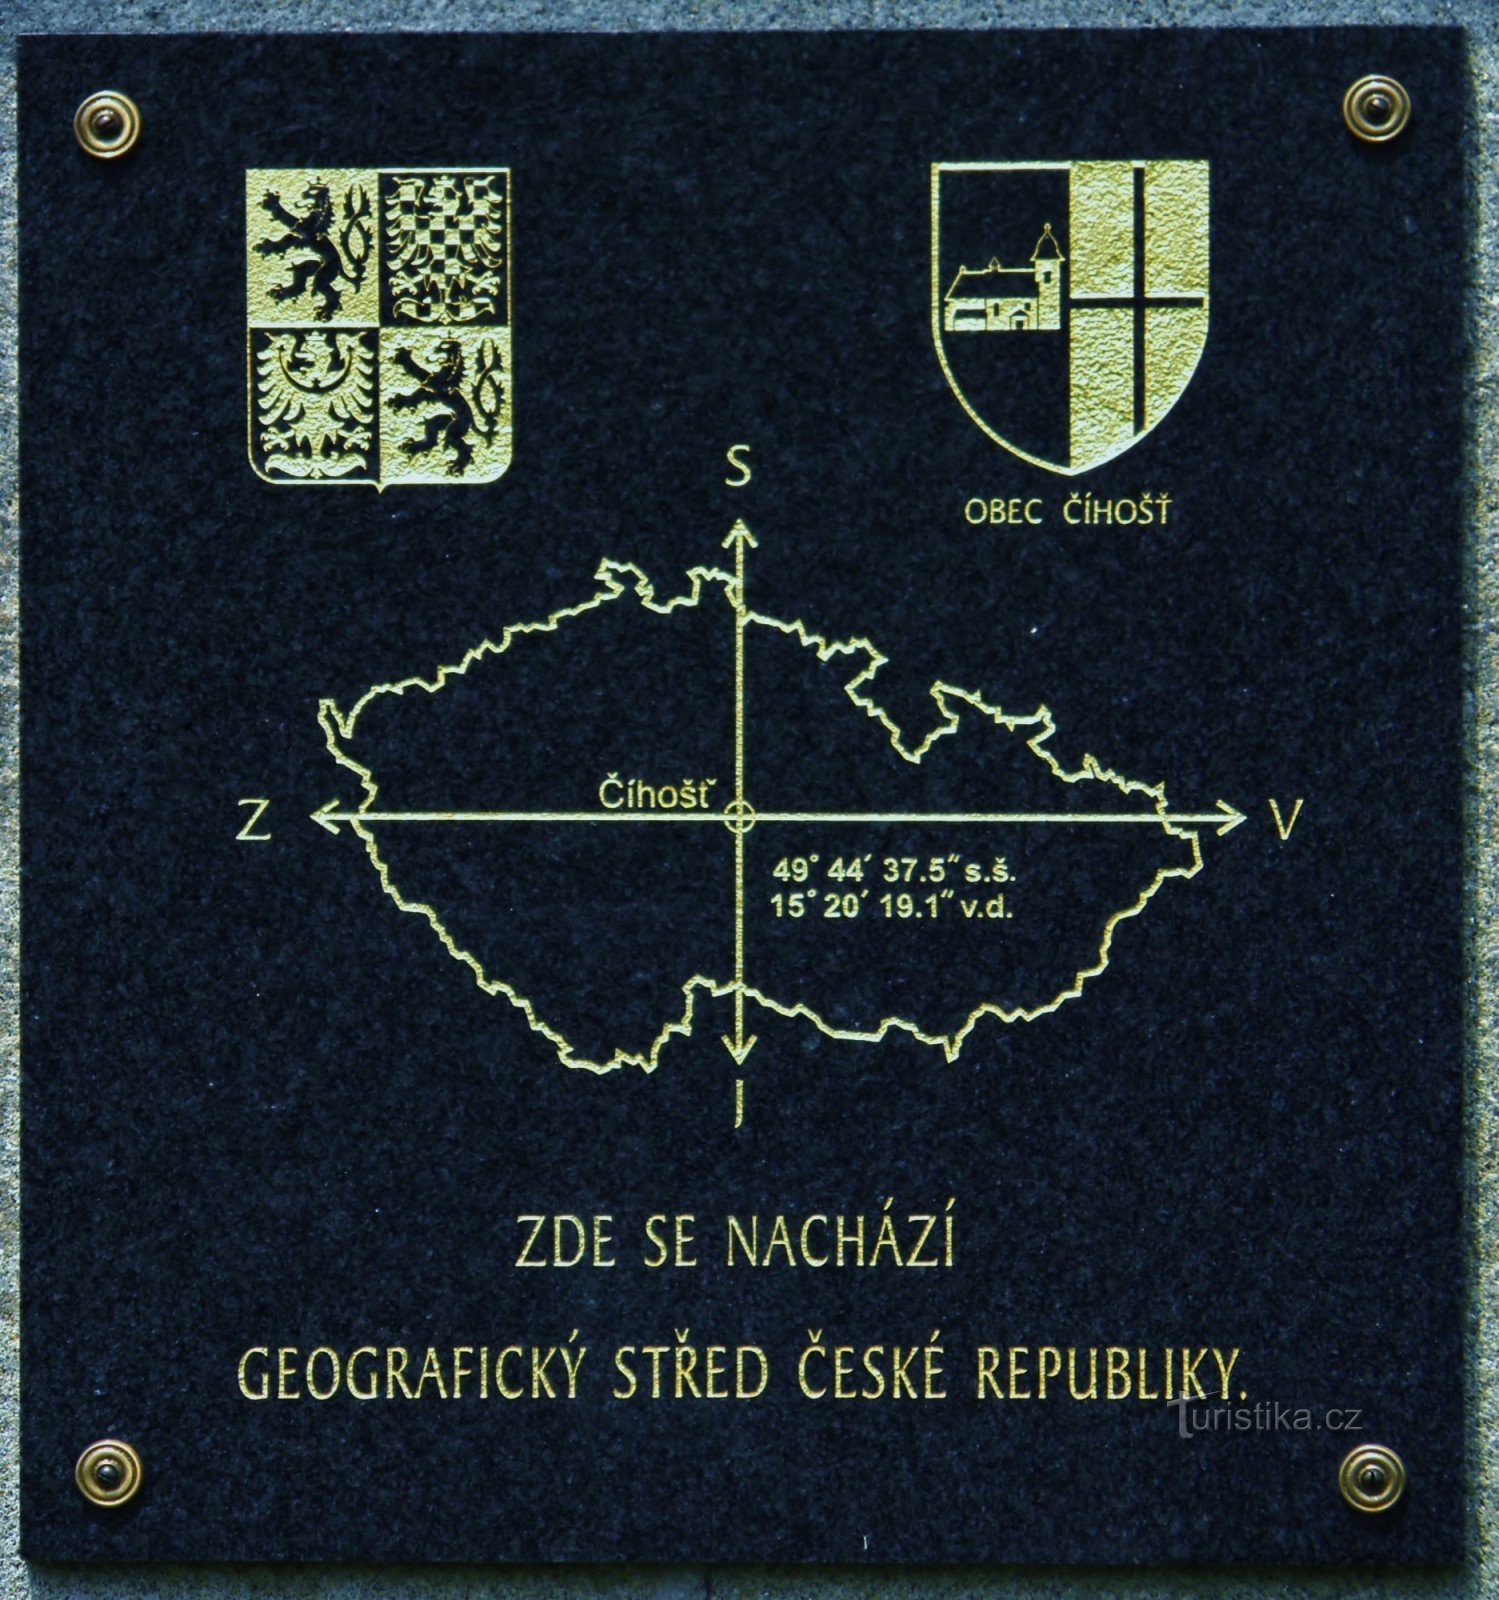 Information board on a stone monument in the geographical center of the Czech Republic.